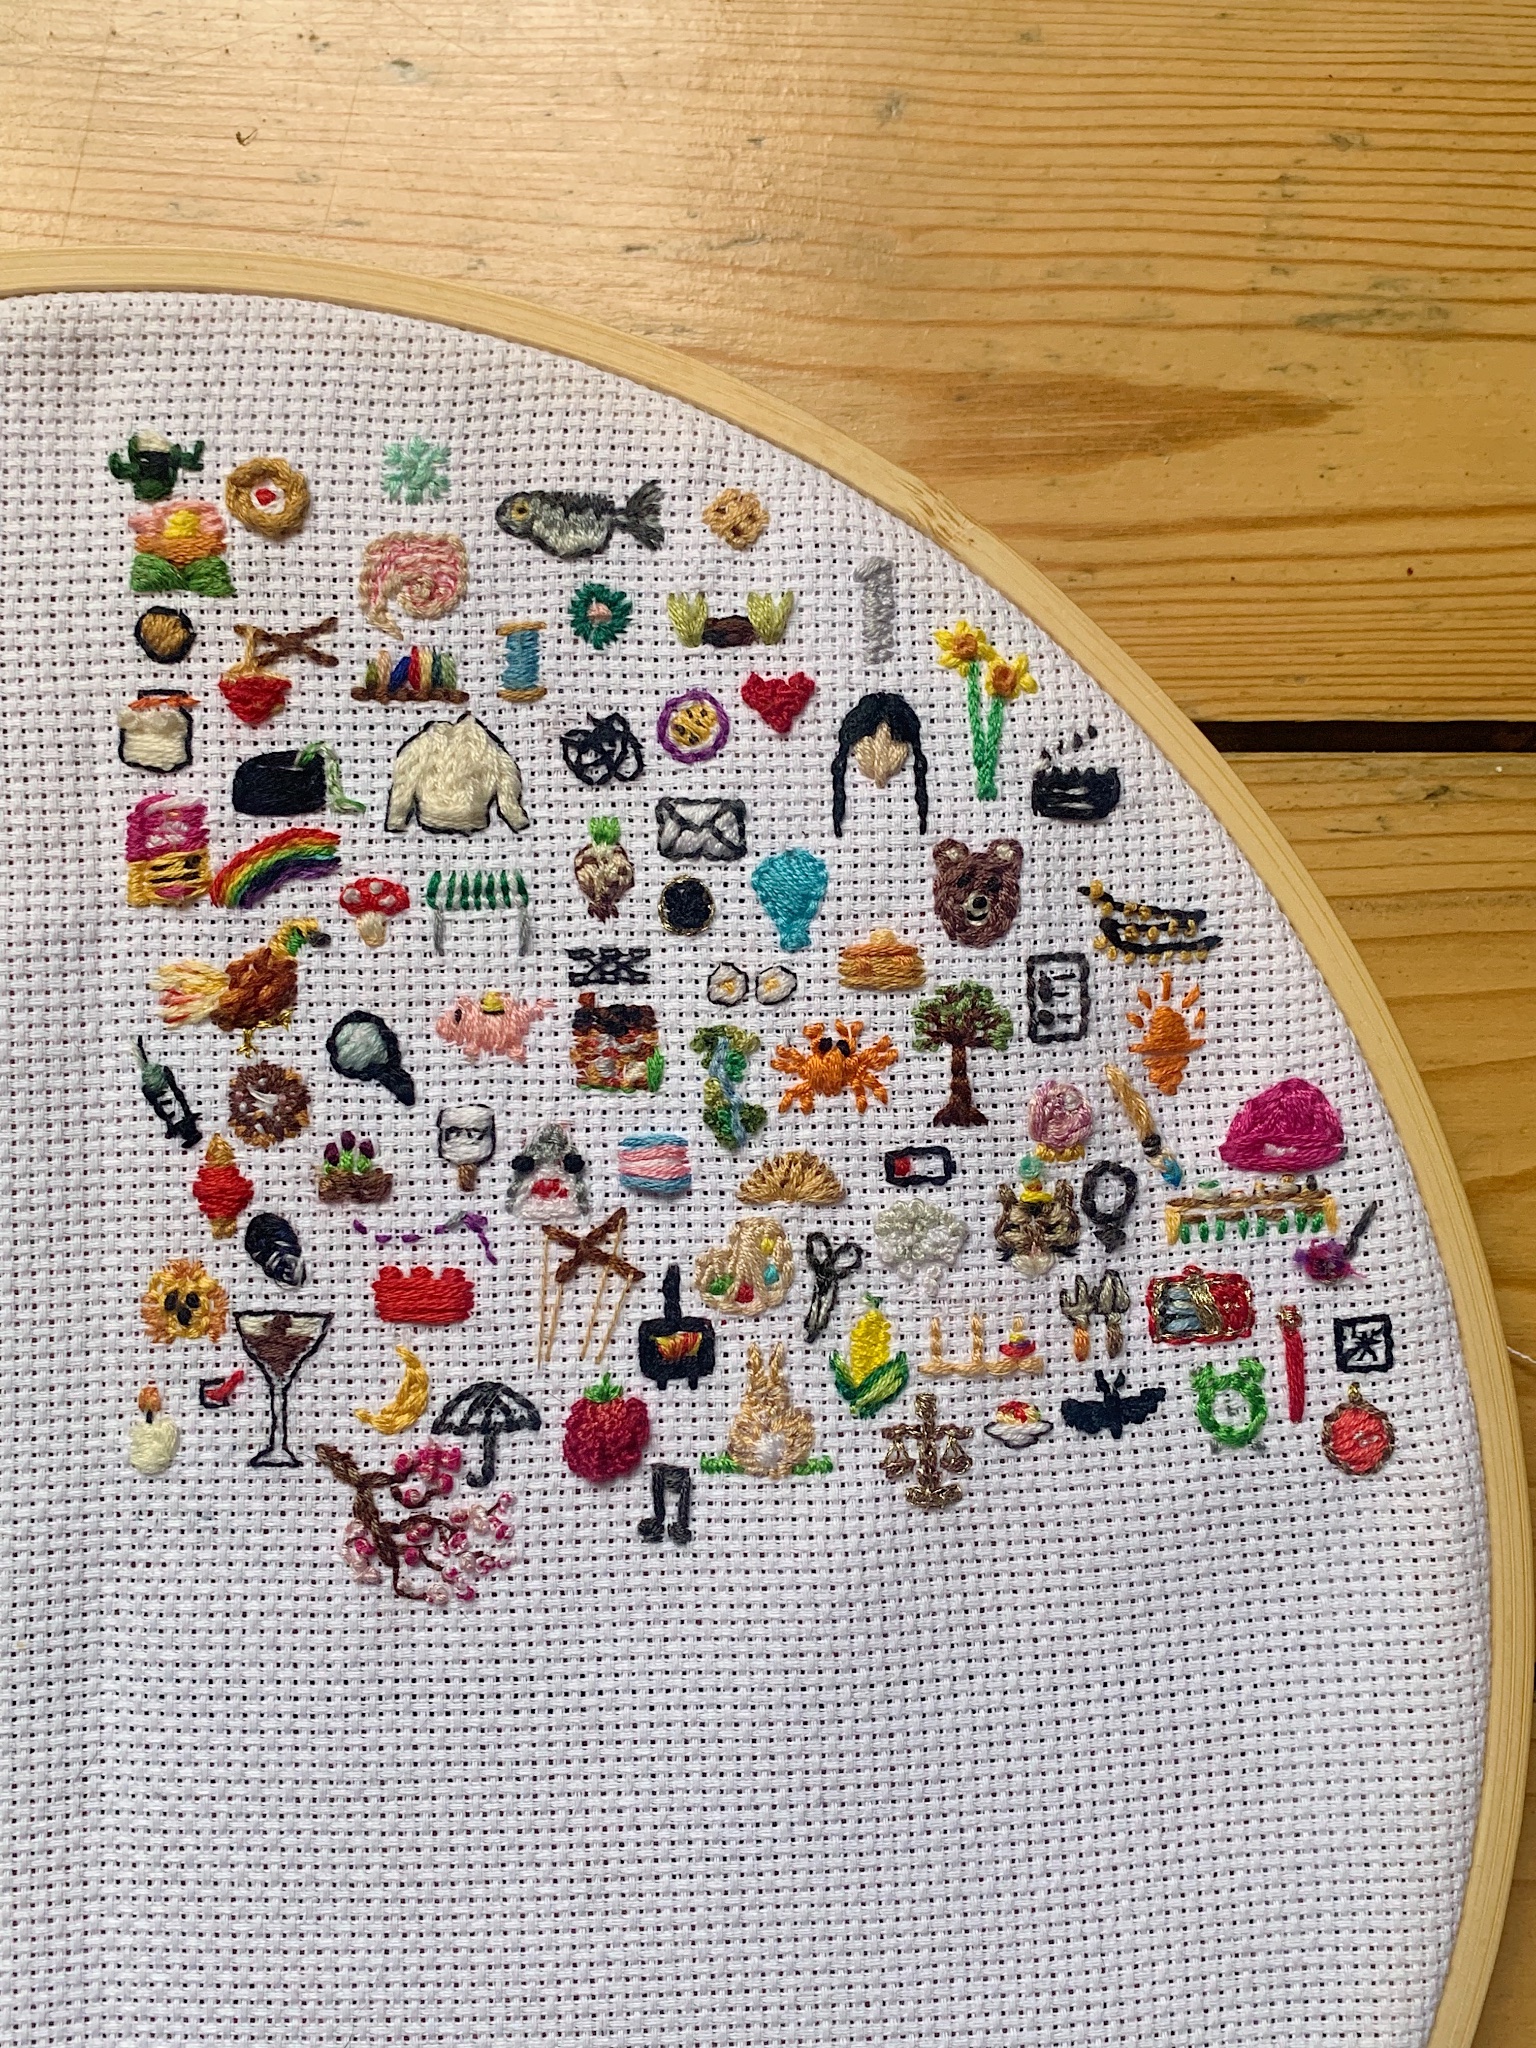 Dr Ola Demkowicz on X: Three full months of my 2023 embroidery